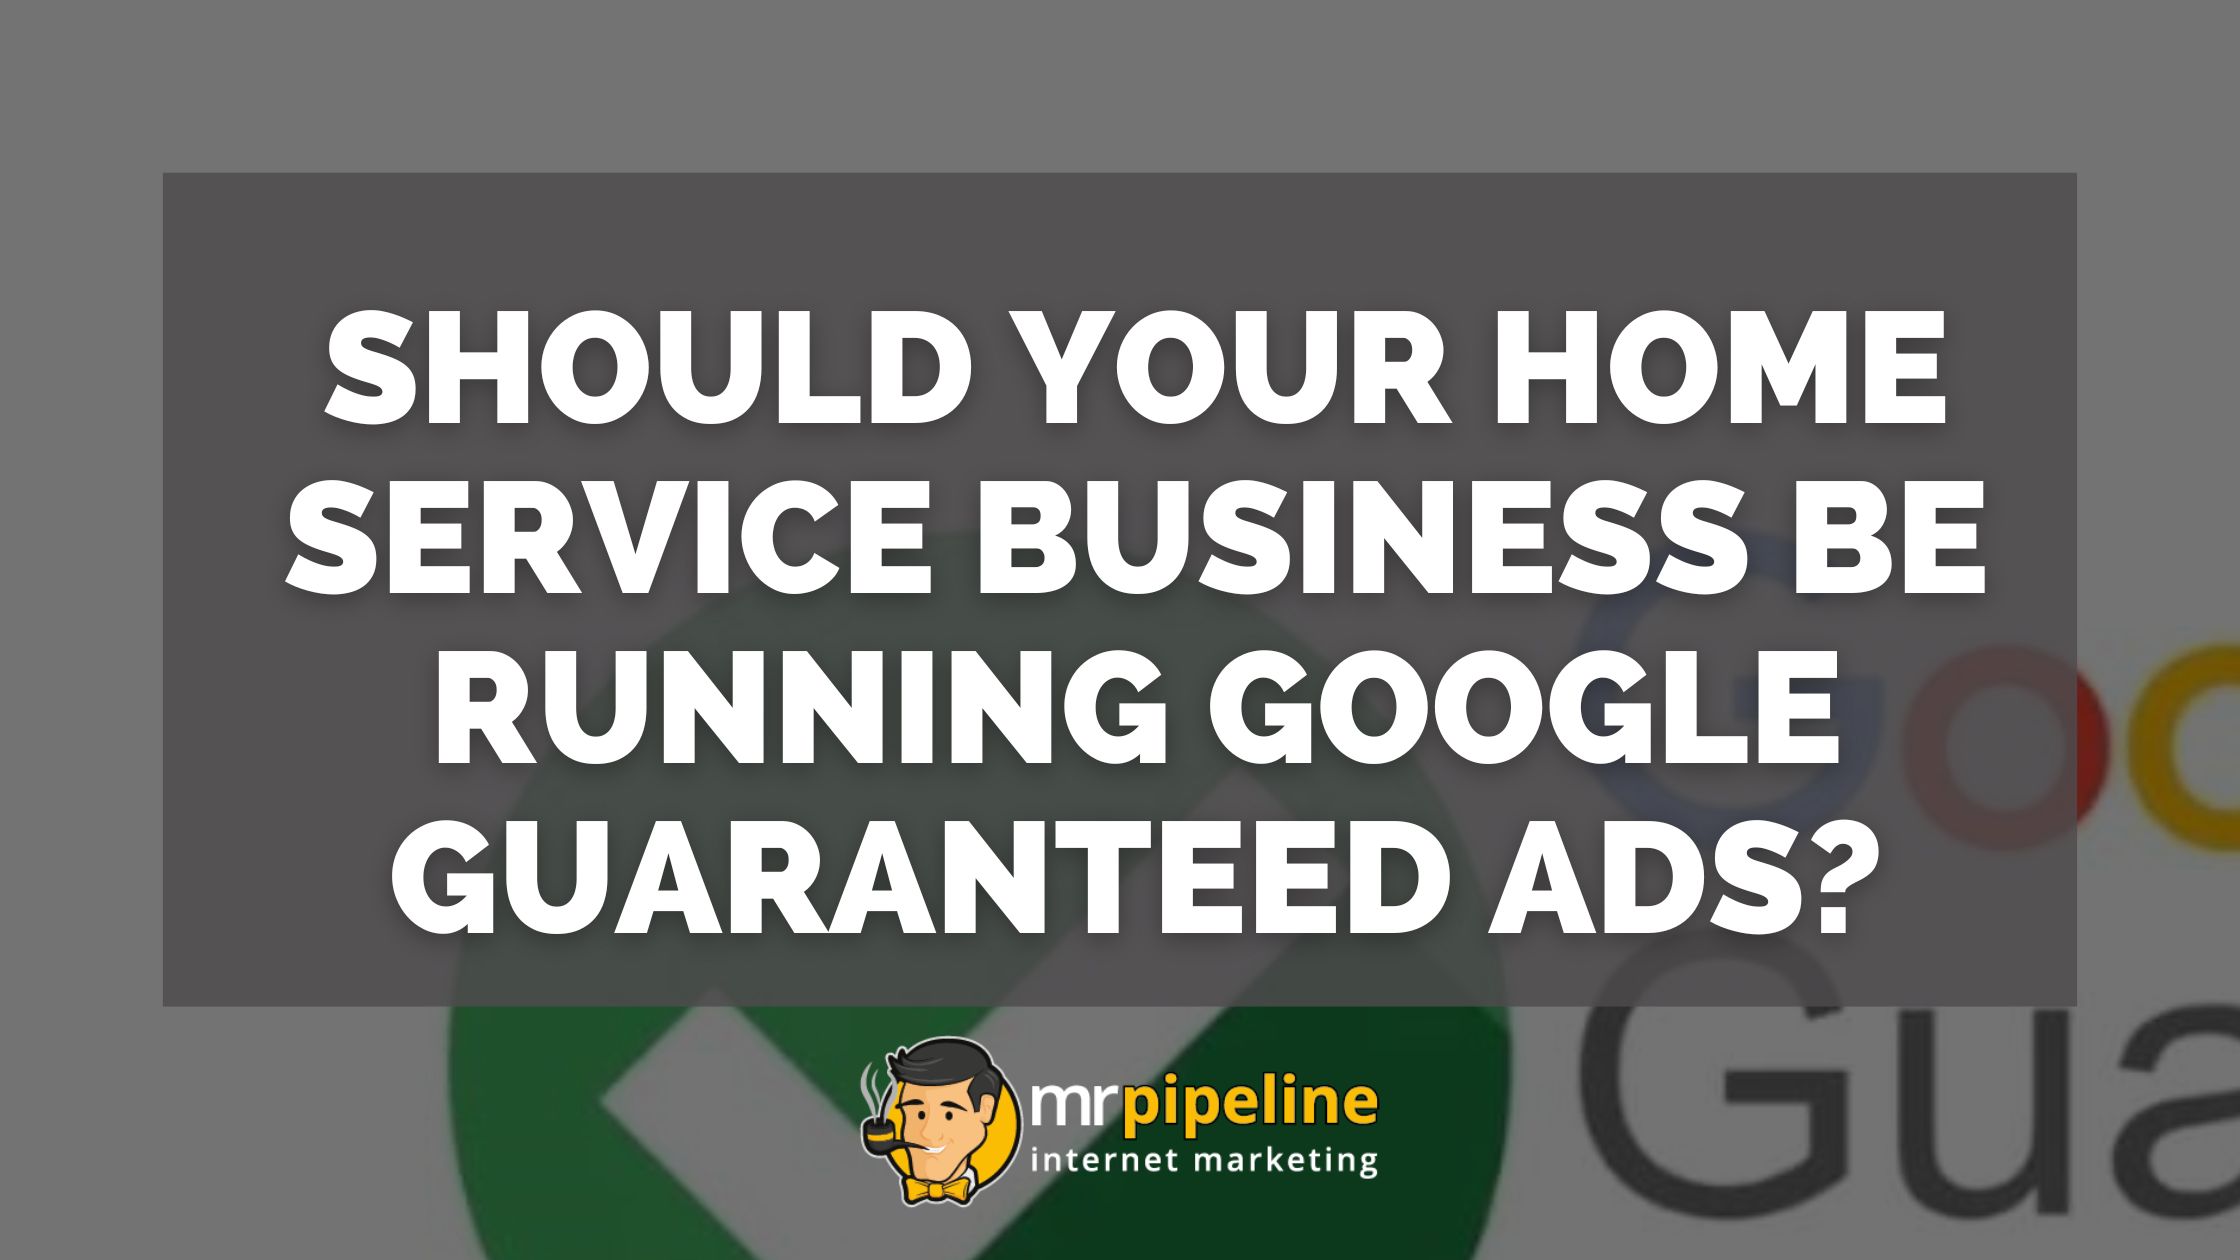 Google Guaranteed Ads: Boost Your Home Service Business